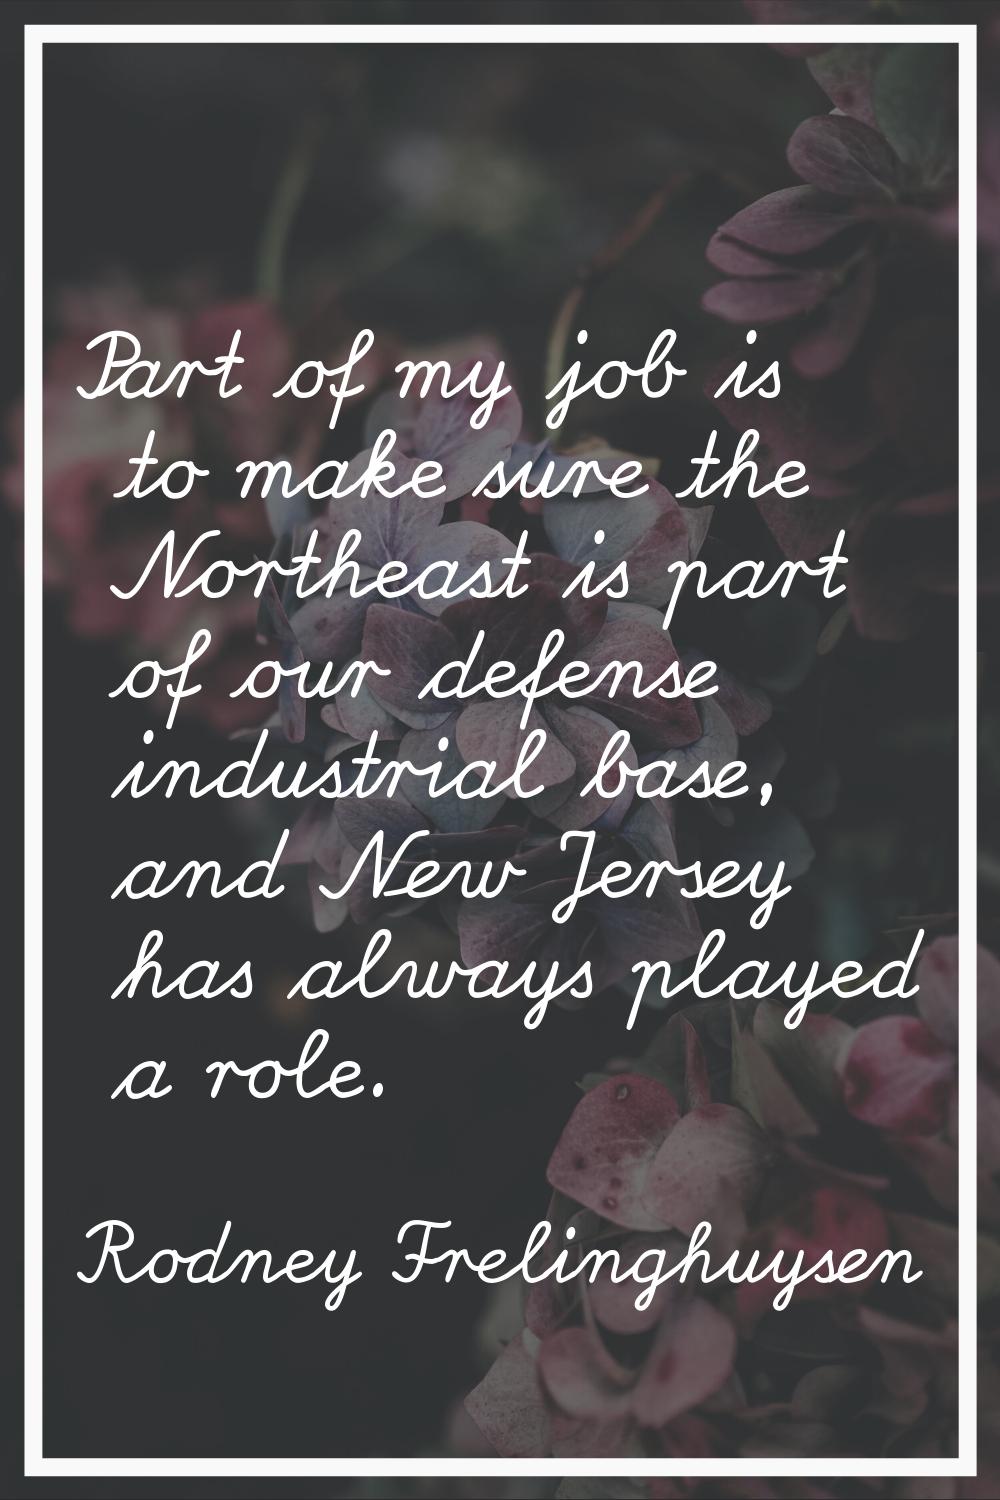 Part of my job is to make sure the Northeast is part of our defense industrial base, and New Jersey